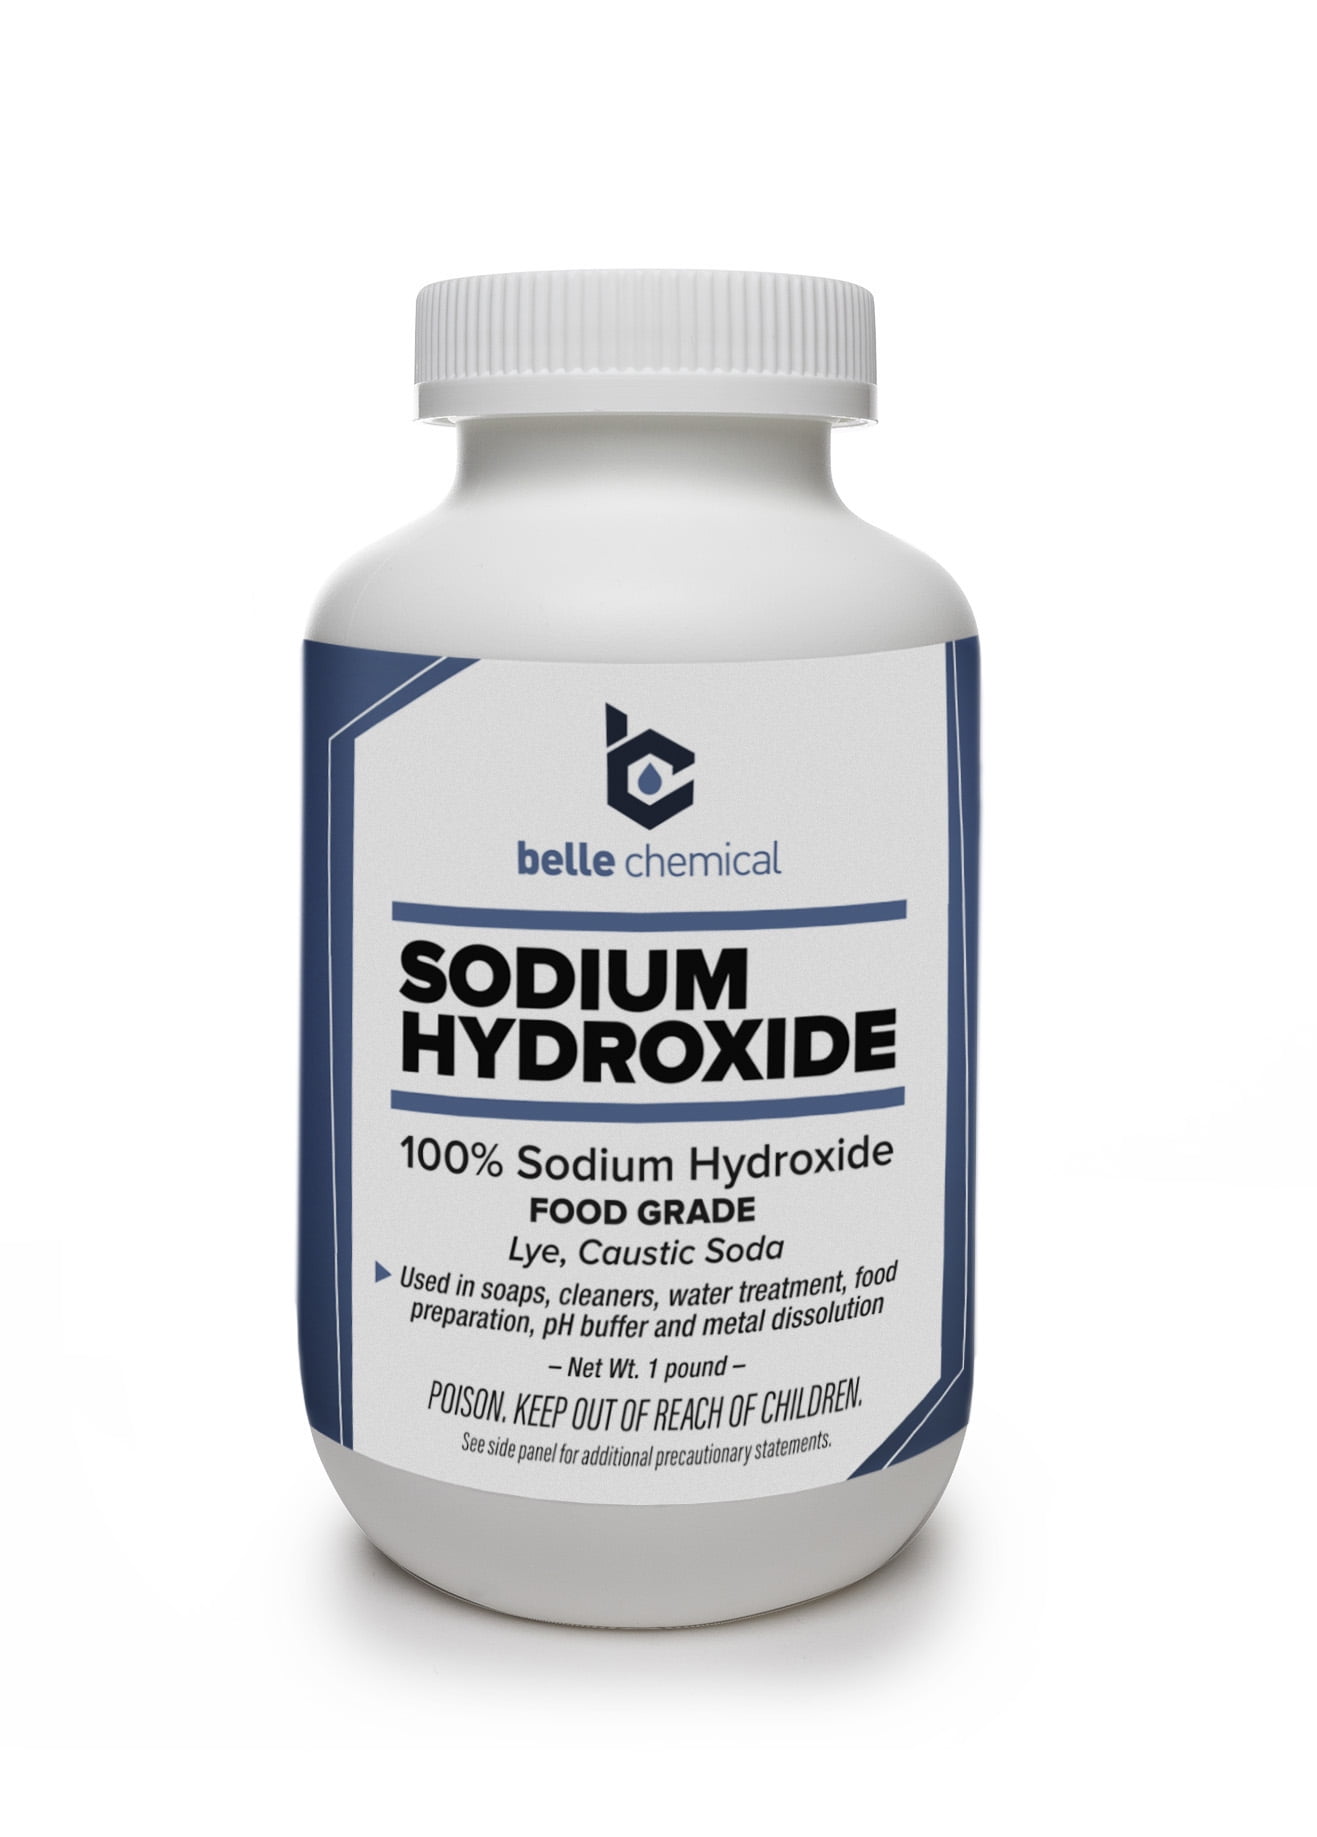  1 lb Food Grade Sodium Hydroxide Lye Evenly-Sized Micro Pels  (Beads or Particles) - 1 lb Bottle - Lye Drain Cleaner - FREE SHIPPING  (almost all locations within the 48 contiguous